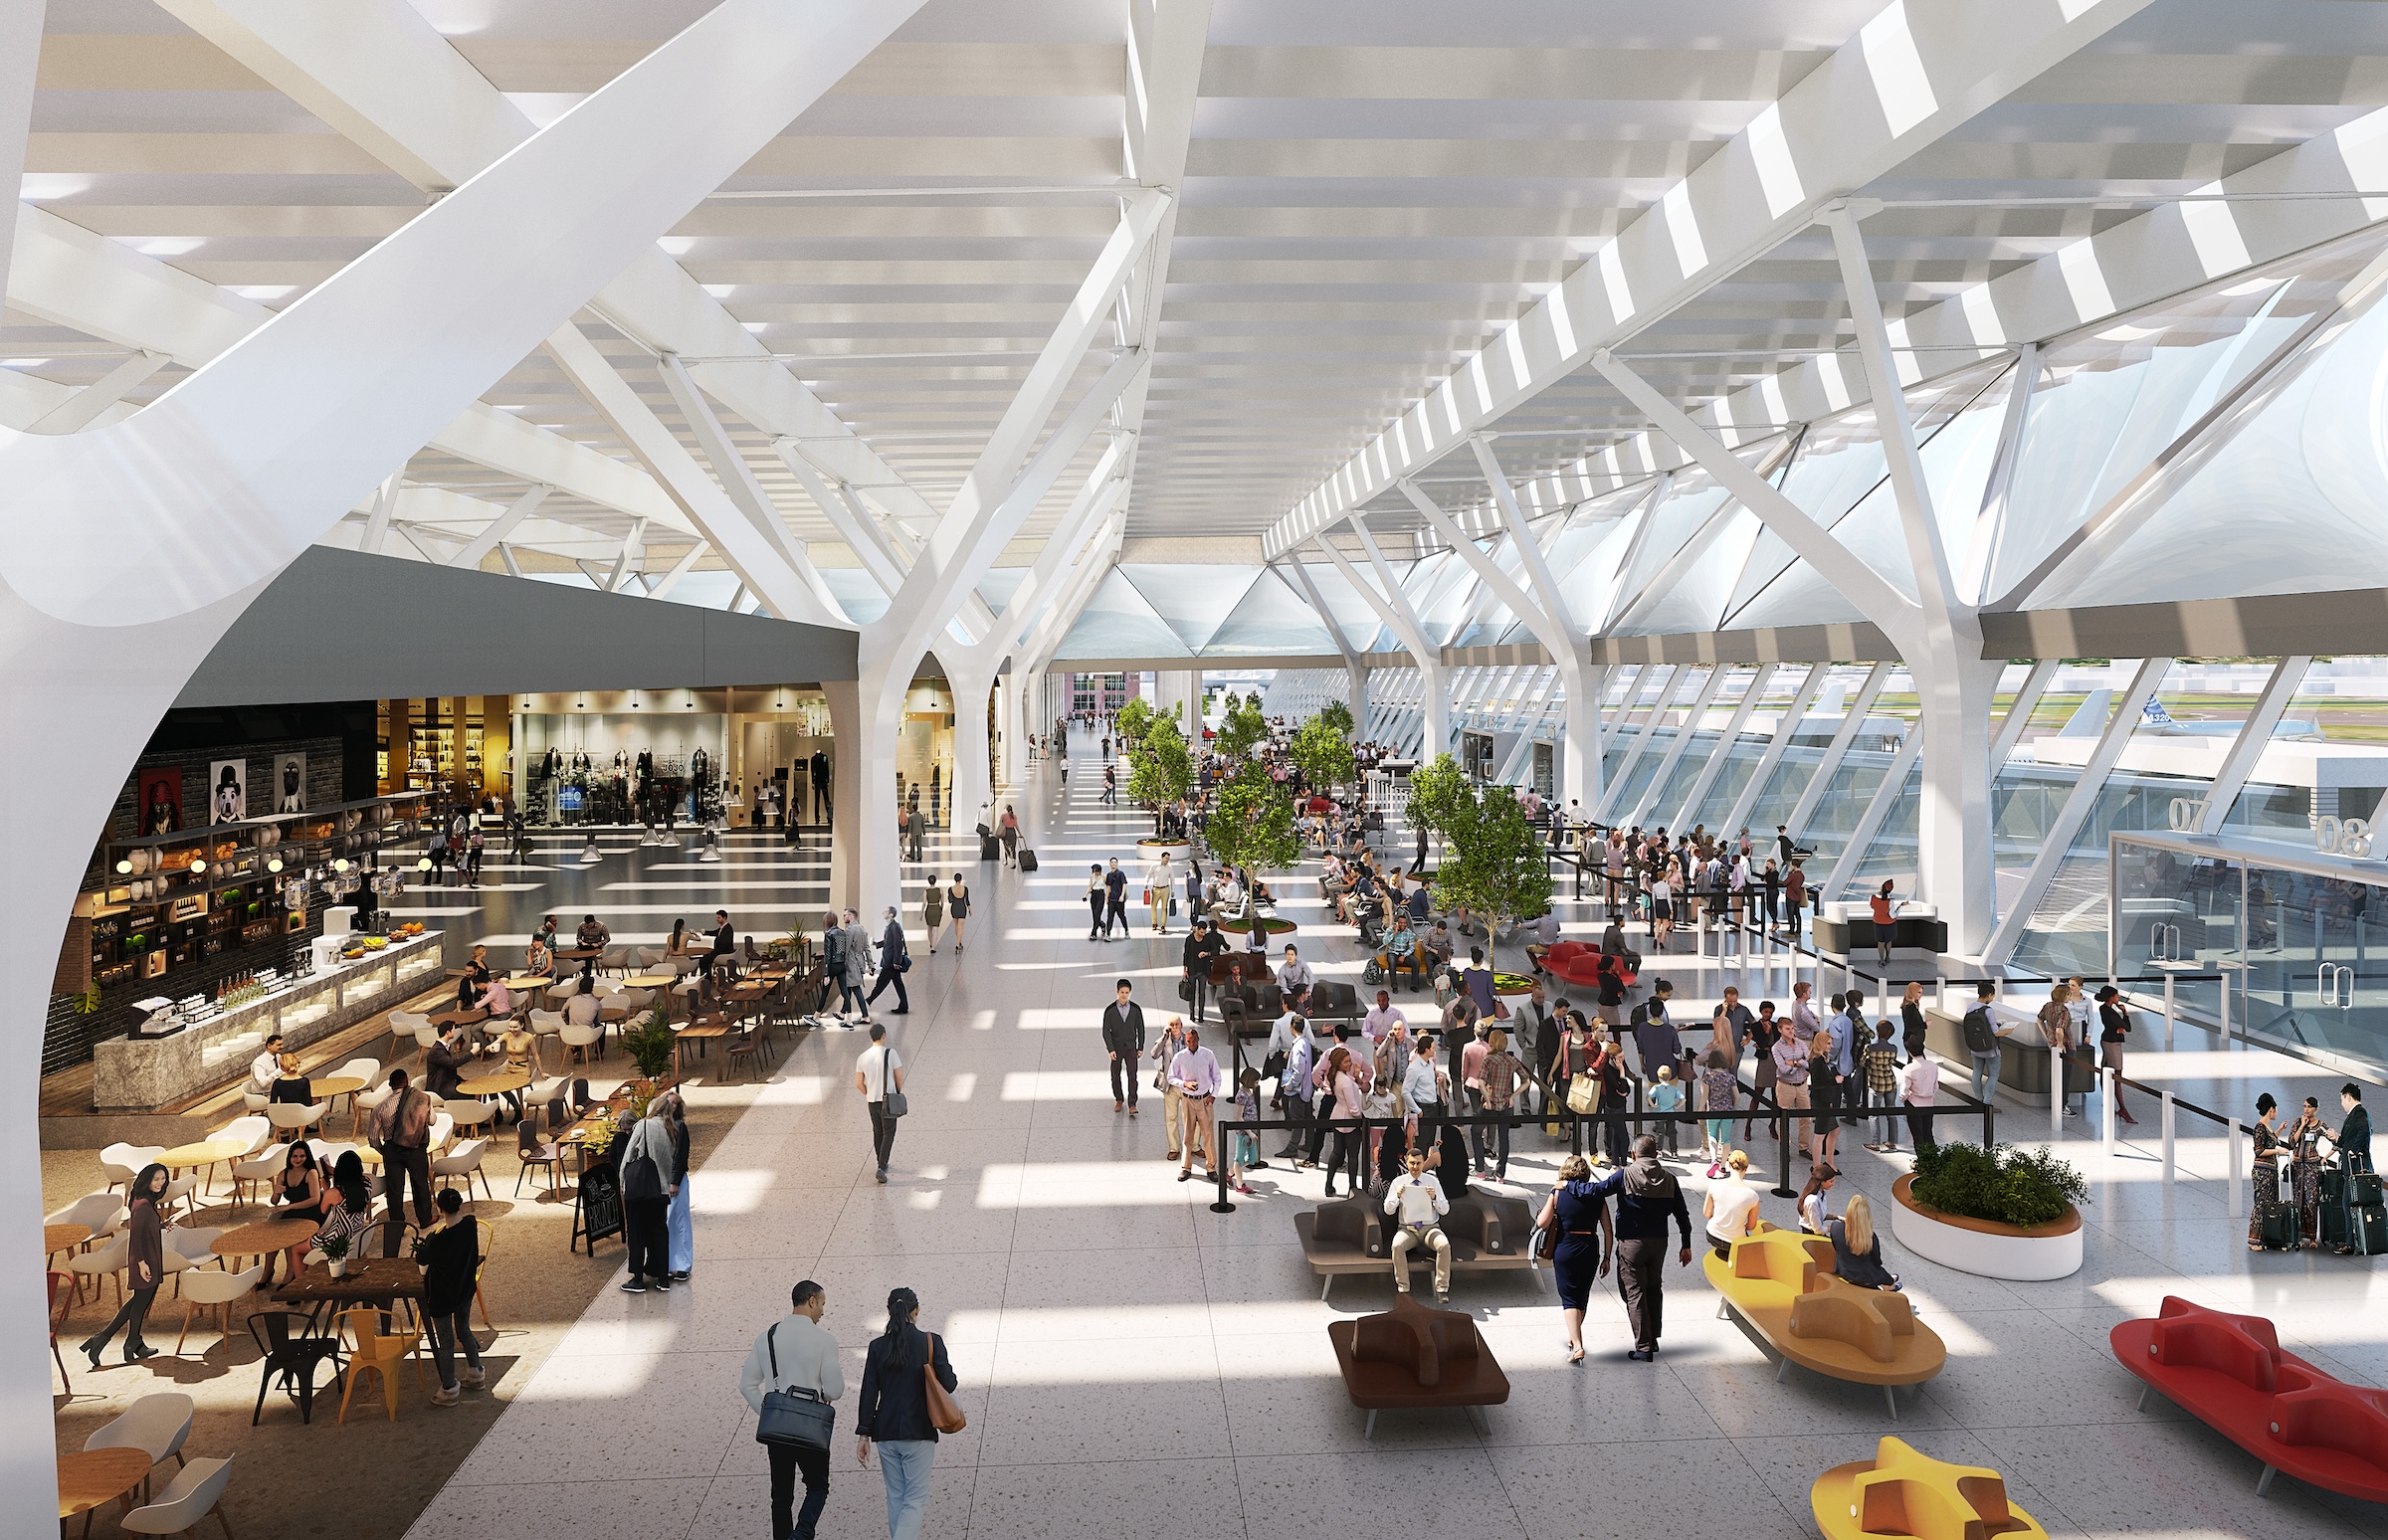 Rafael Viñoly Architects’ design for the new Florence, Italy, airport terminal will feature a rooftop vineyard